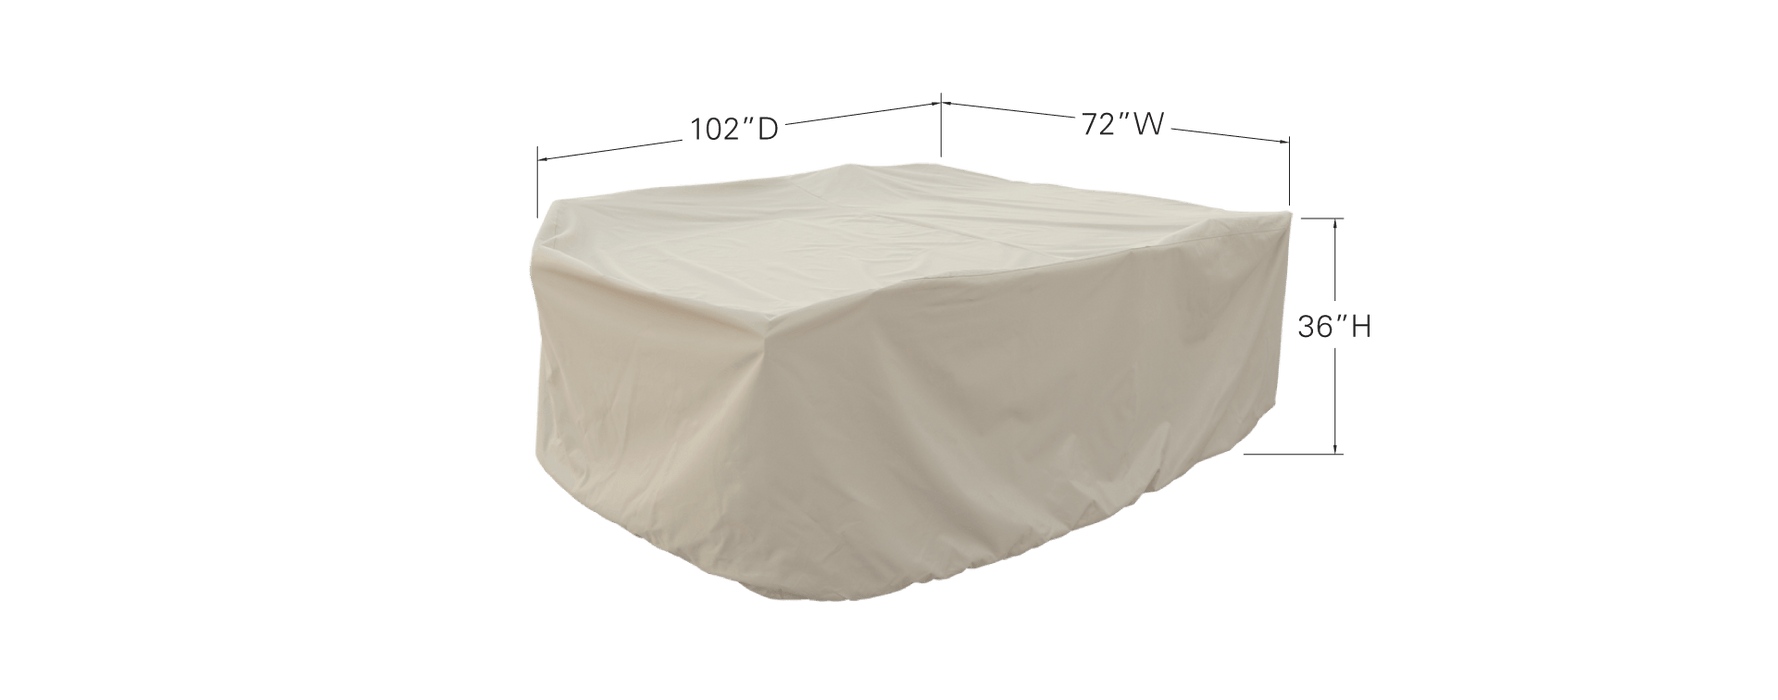 Medium Oval/Rectangular Table and Chair Cover